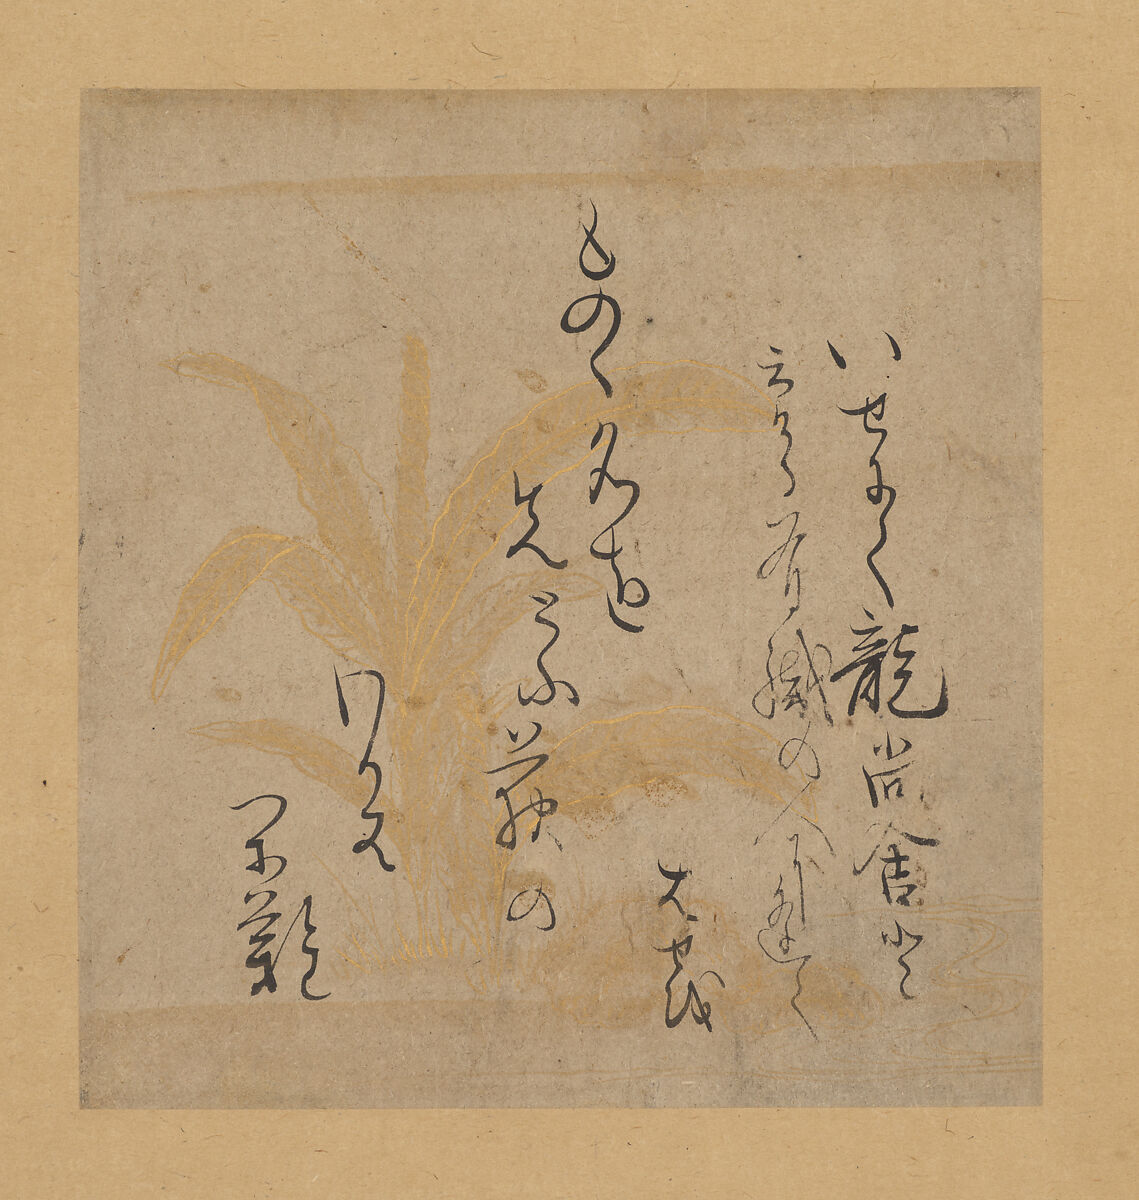 “The names of things” haiku, Matsuo Bashō (Japanese, 1644–1694), Shikishi mounted as hanging scroll: ink on paper decorated with gold, Japan 